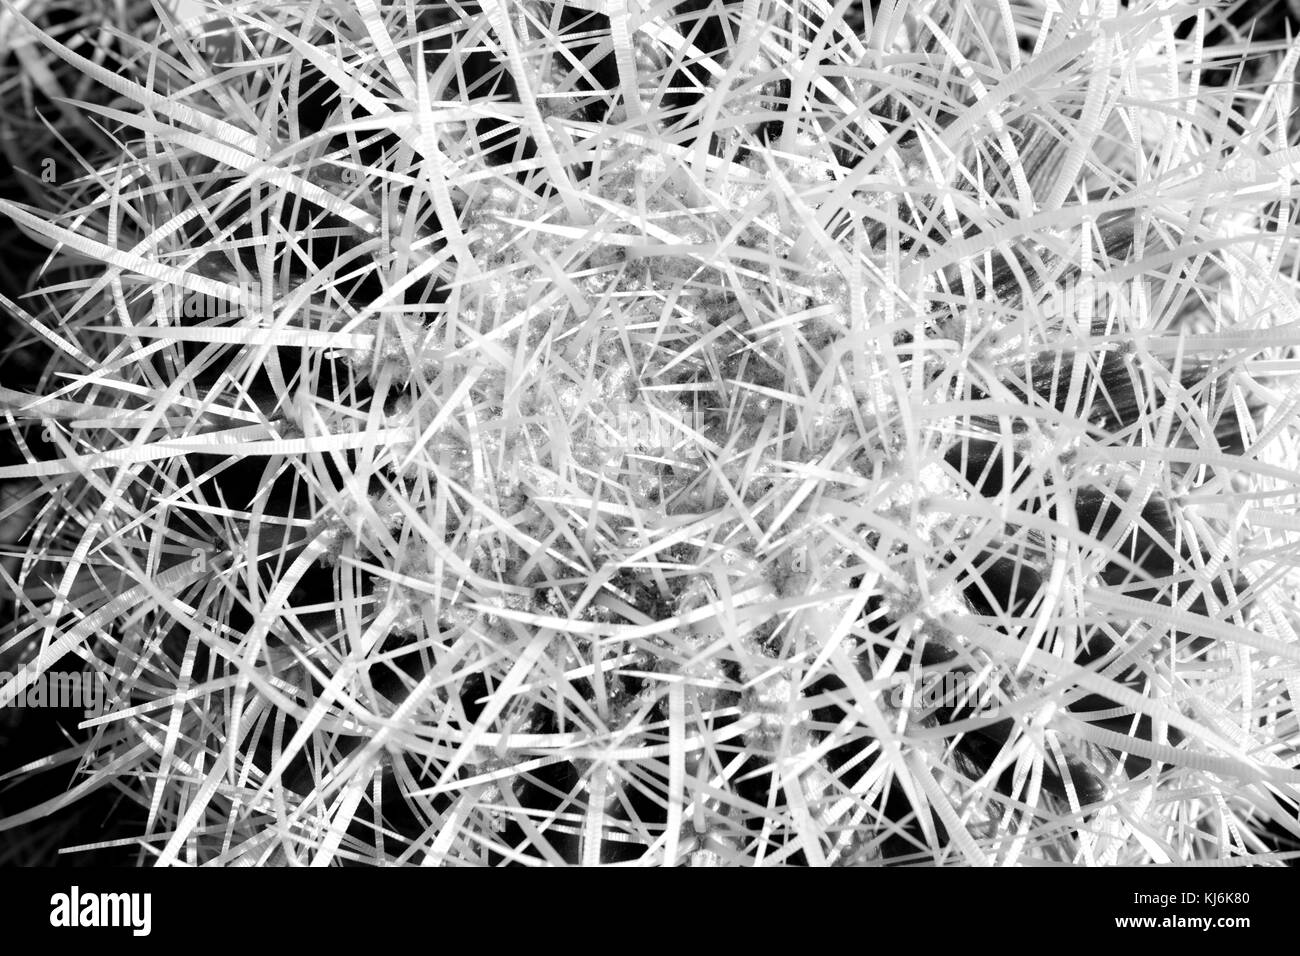 Abstract view of cactus center with needles in black and white/ Closeup cactus needles background Stock Photo